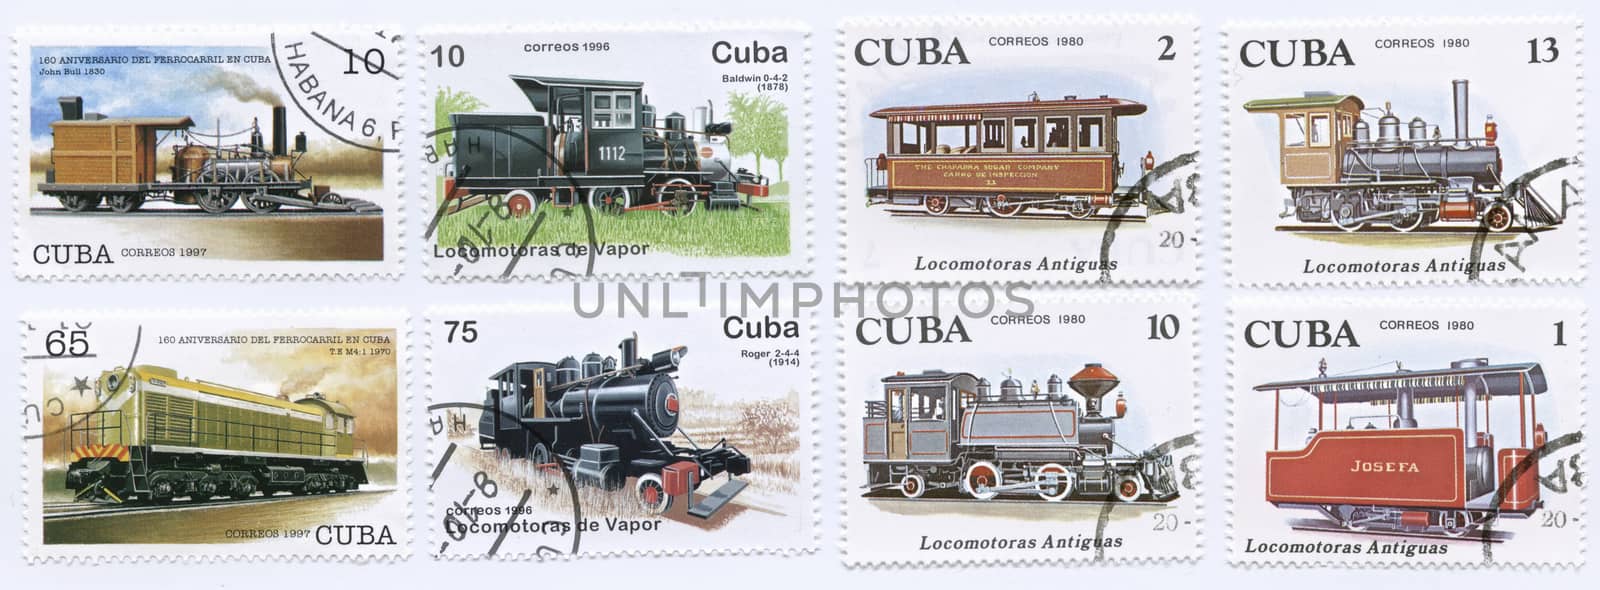 Train stamps printed in Cuba a collection locomotive and train designs